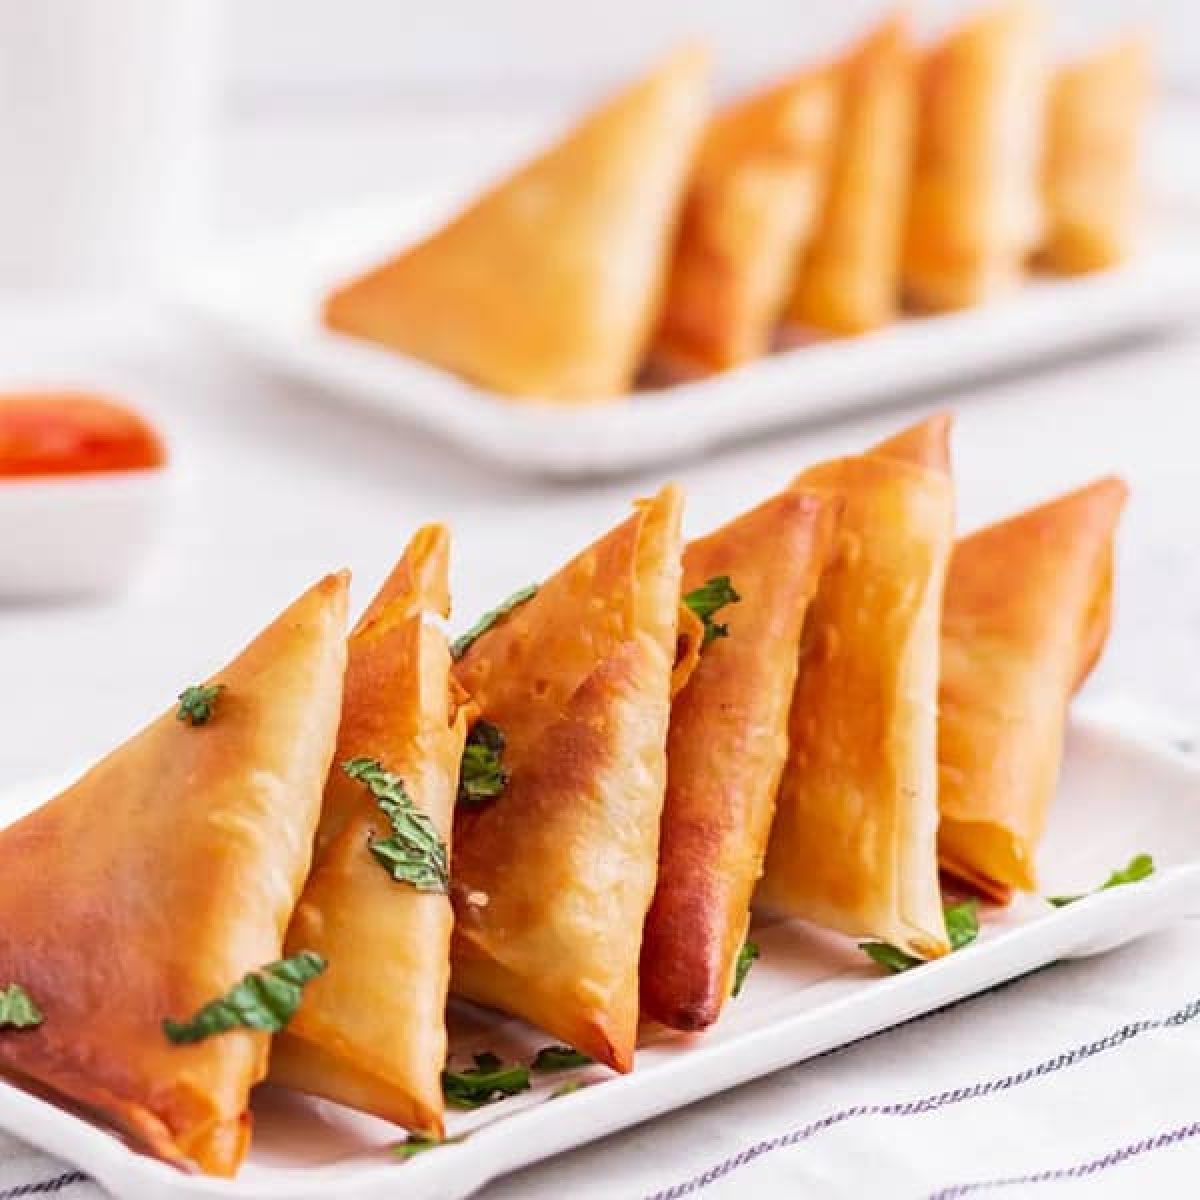 Here is a step-by-step guide on how to make the best Samosa recipe and sell them to generate income on the streets.